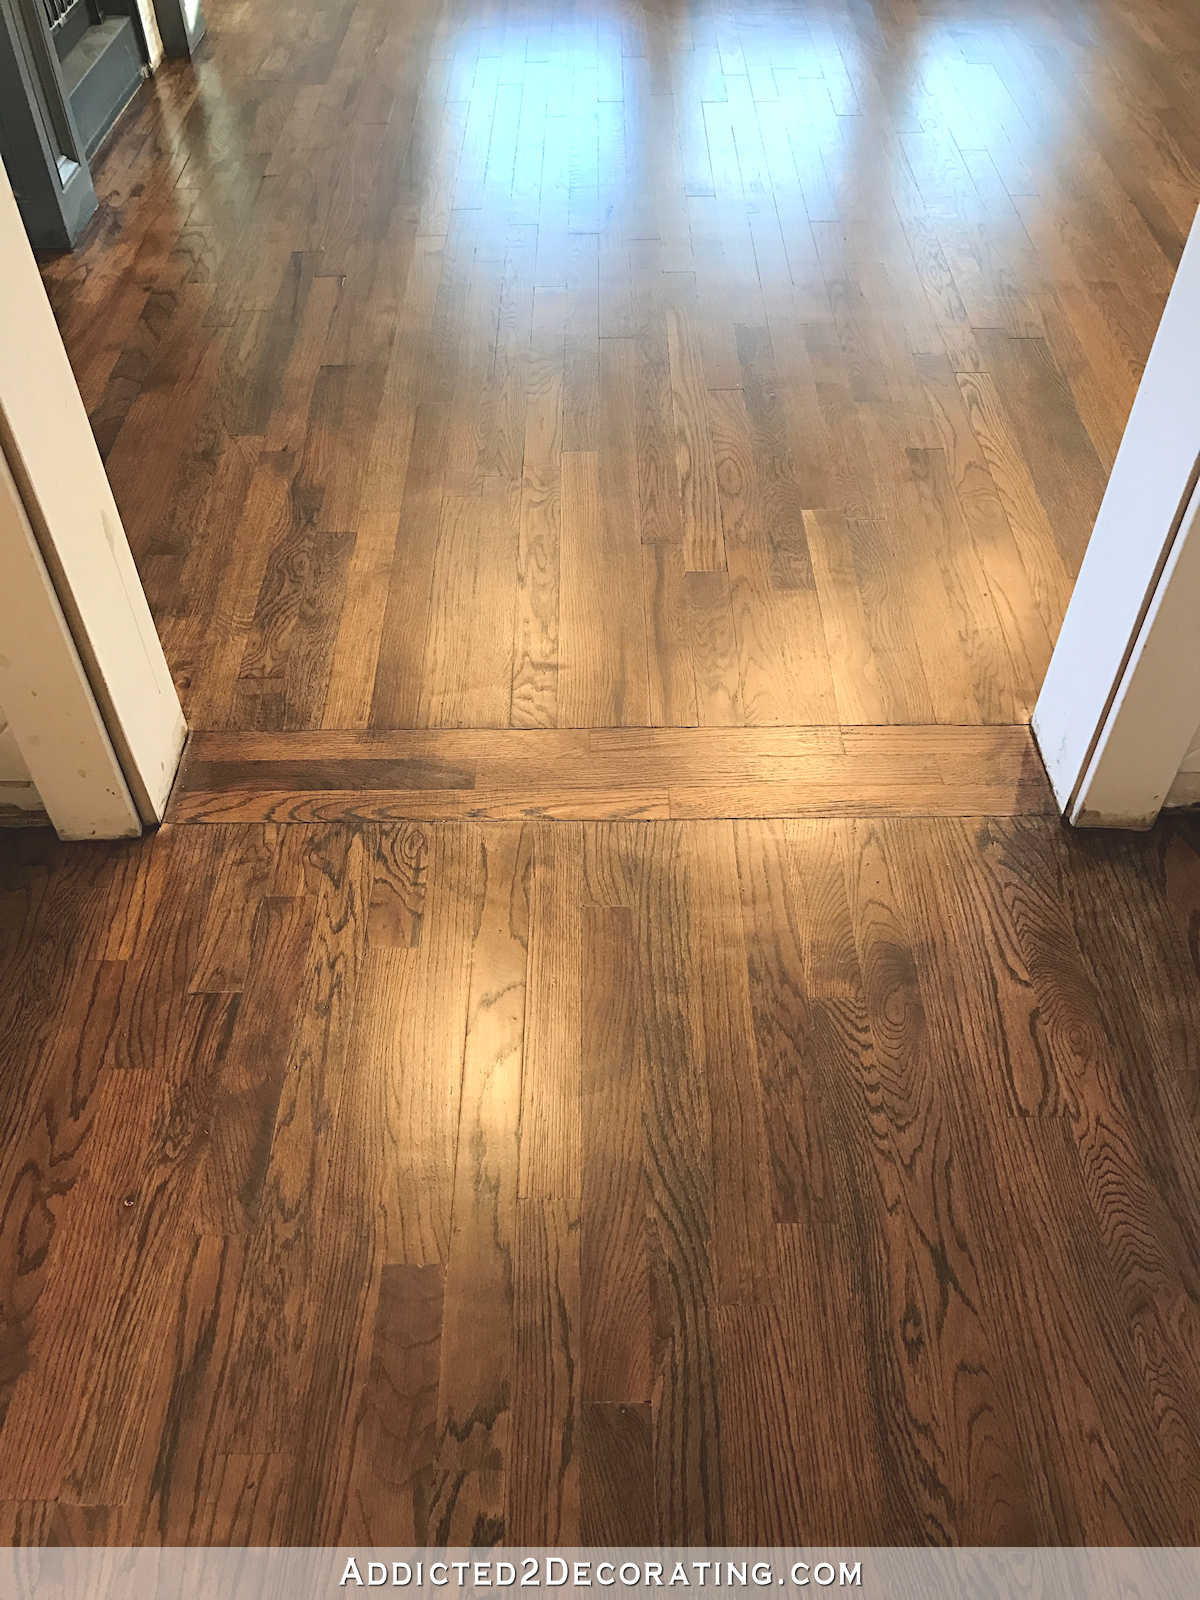 17 Unique Sanding and Restaining Hardwood Floors Cost 2024 free download sanding and restaining hardwood floors cost of wood floor refinishing without sanding fresh here s the cost to within wood floor refinishing without sanding beautiful hardwood floor design t